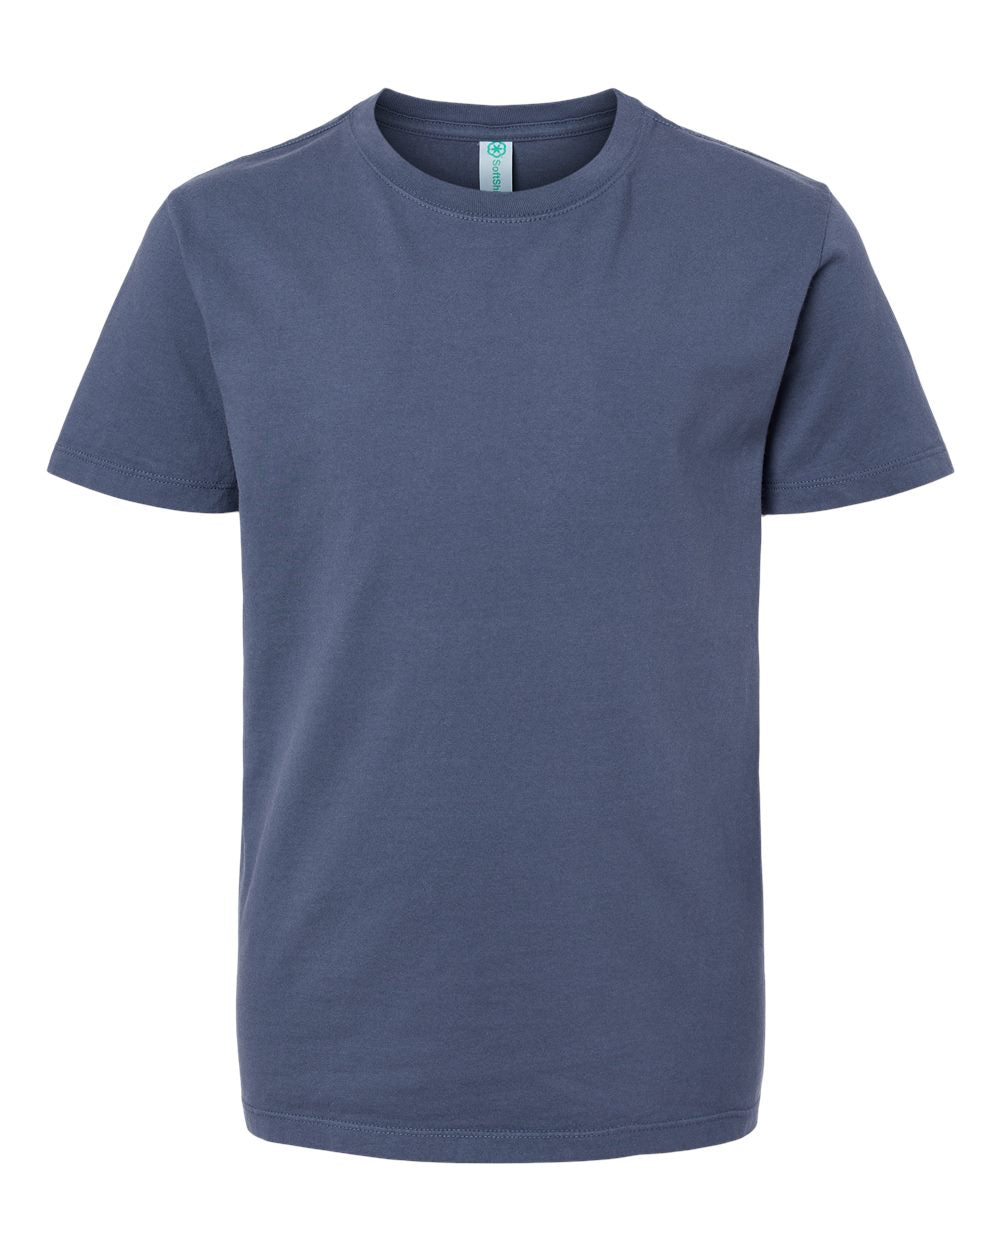 Softshirts® Youth Organic Cotton T-shirt in navy